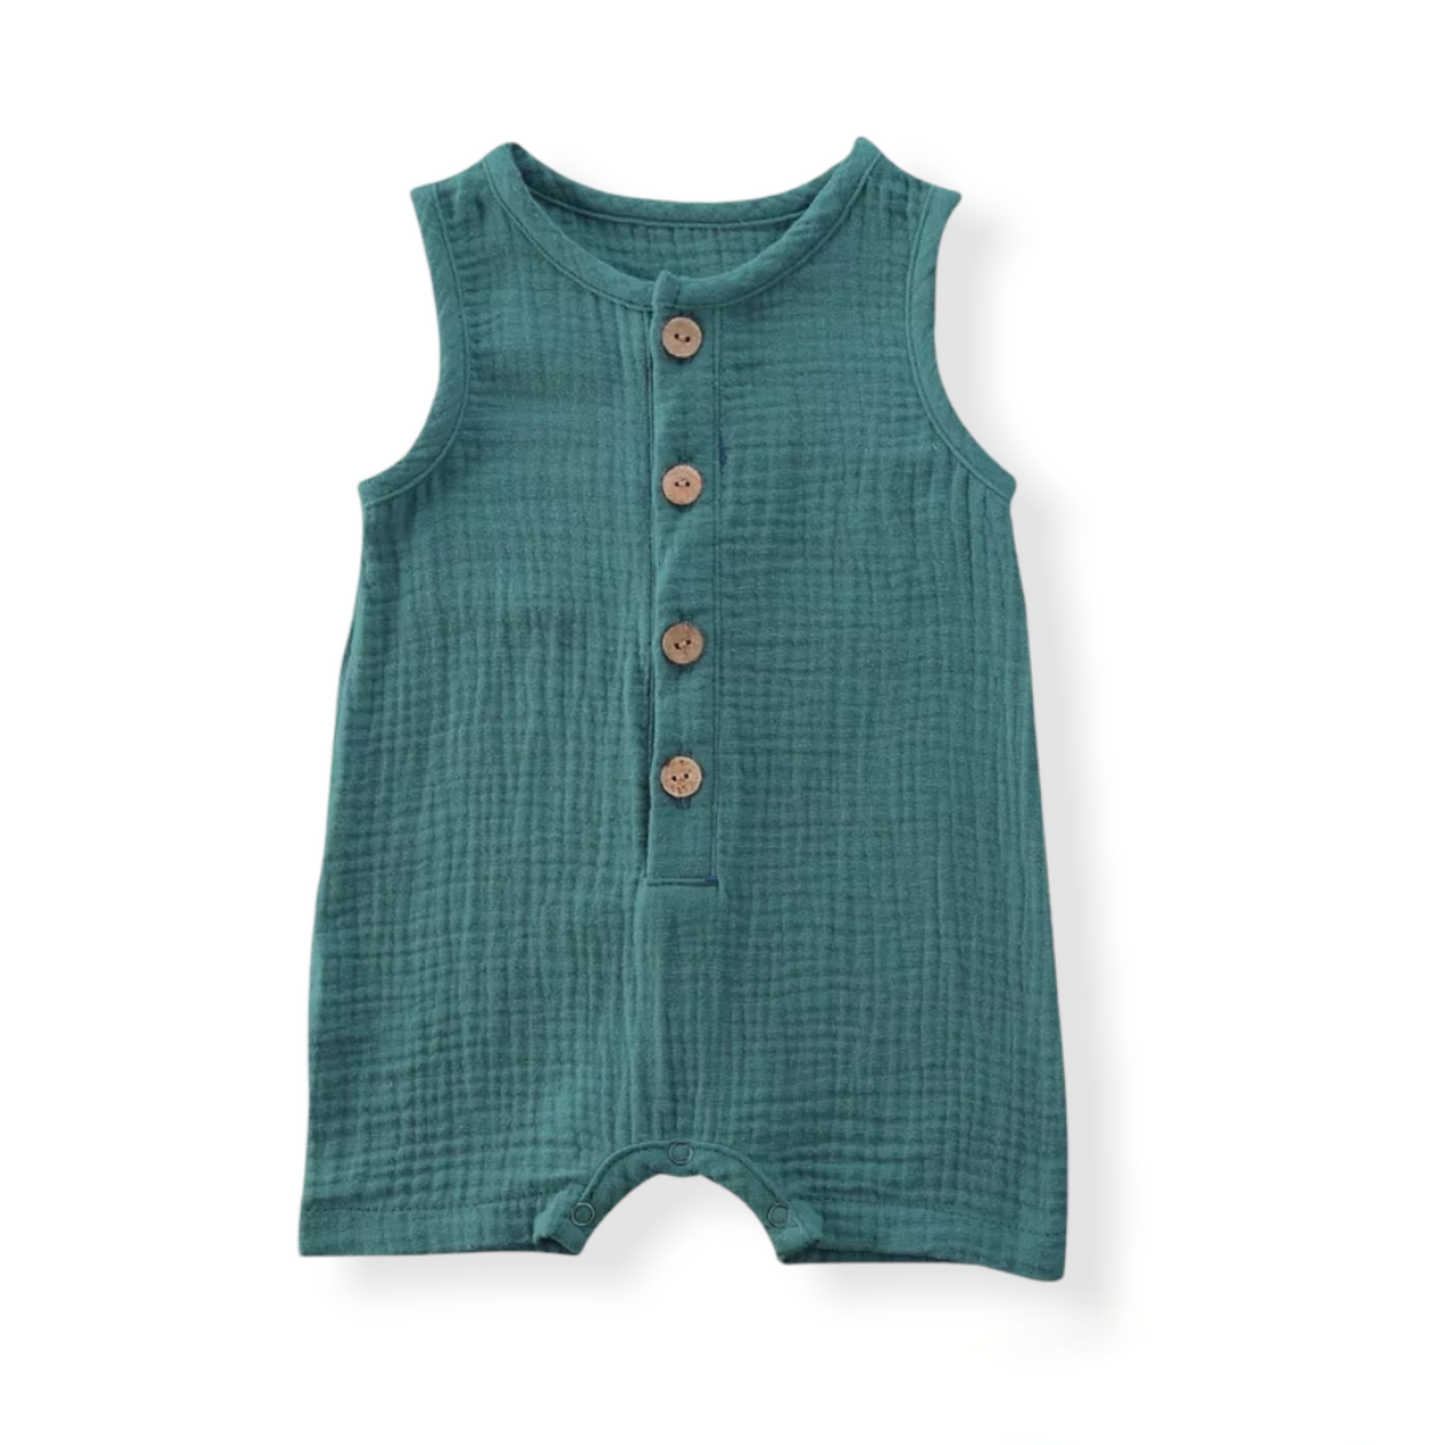 Green cotton baby romper for summer with buttons on the front and bottom- Hunny Bubba Kids